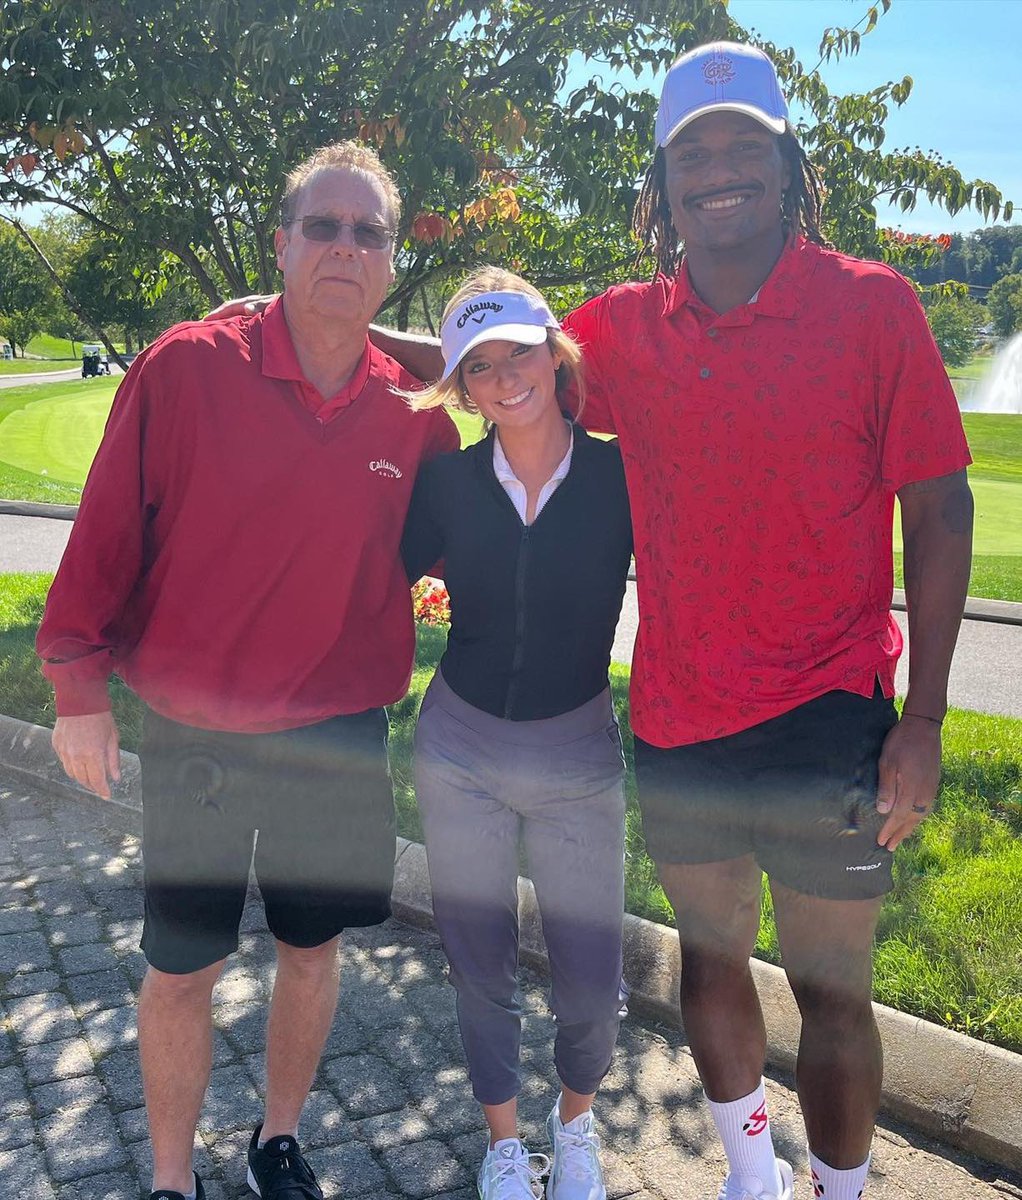 Spotted on the course today: NFL football player Adrian Colbert! Welcome to Great River, @AdrianColbert27 and enjoy your round!